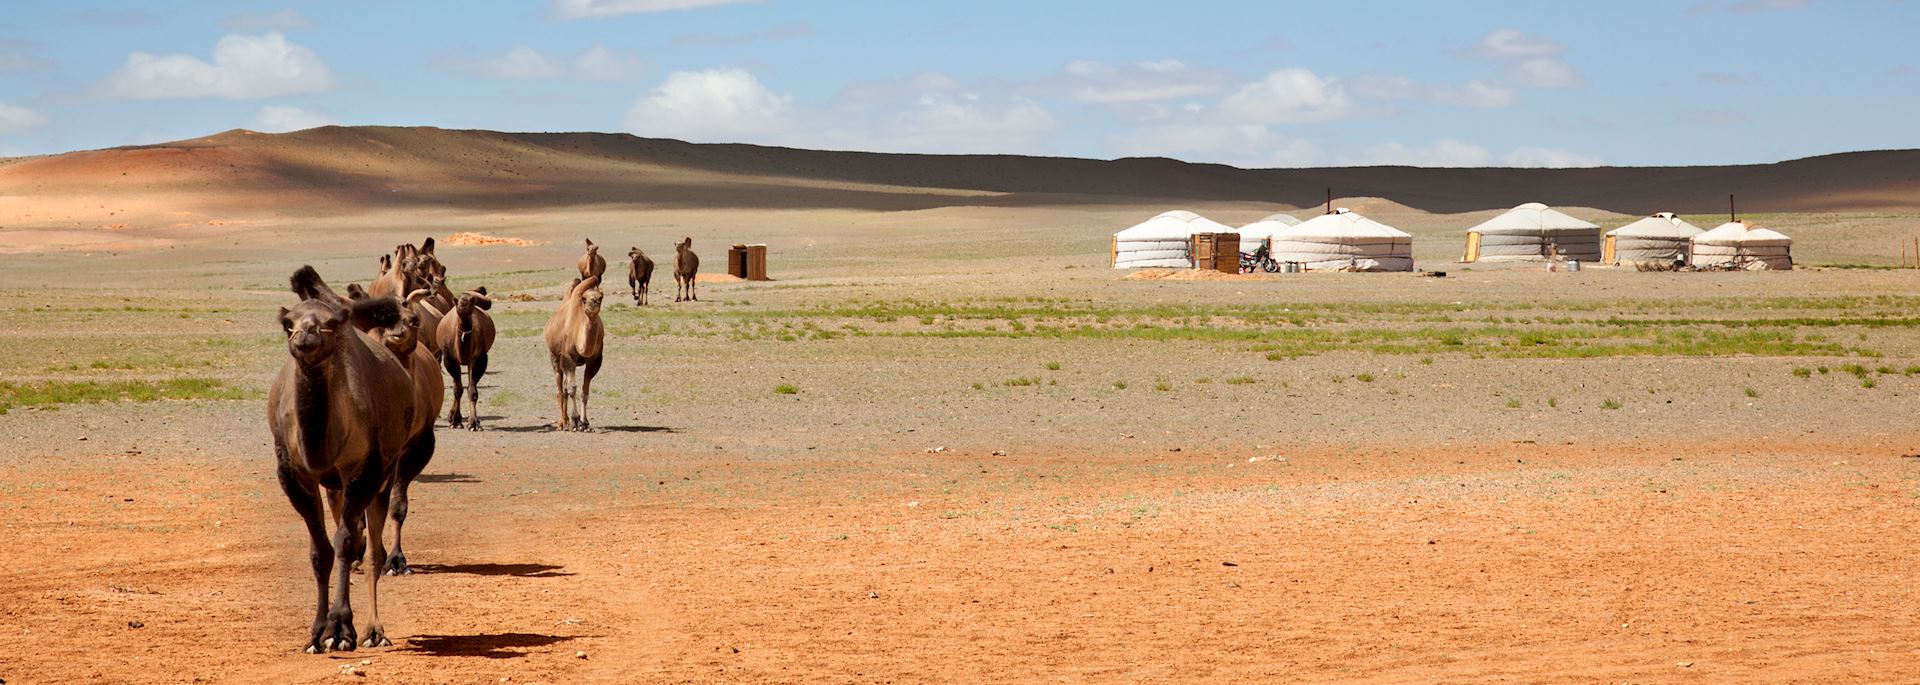 Camels and yurts in the Gobi Desert, Mongolia